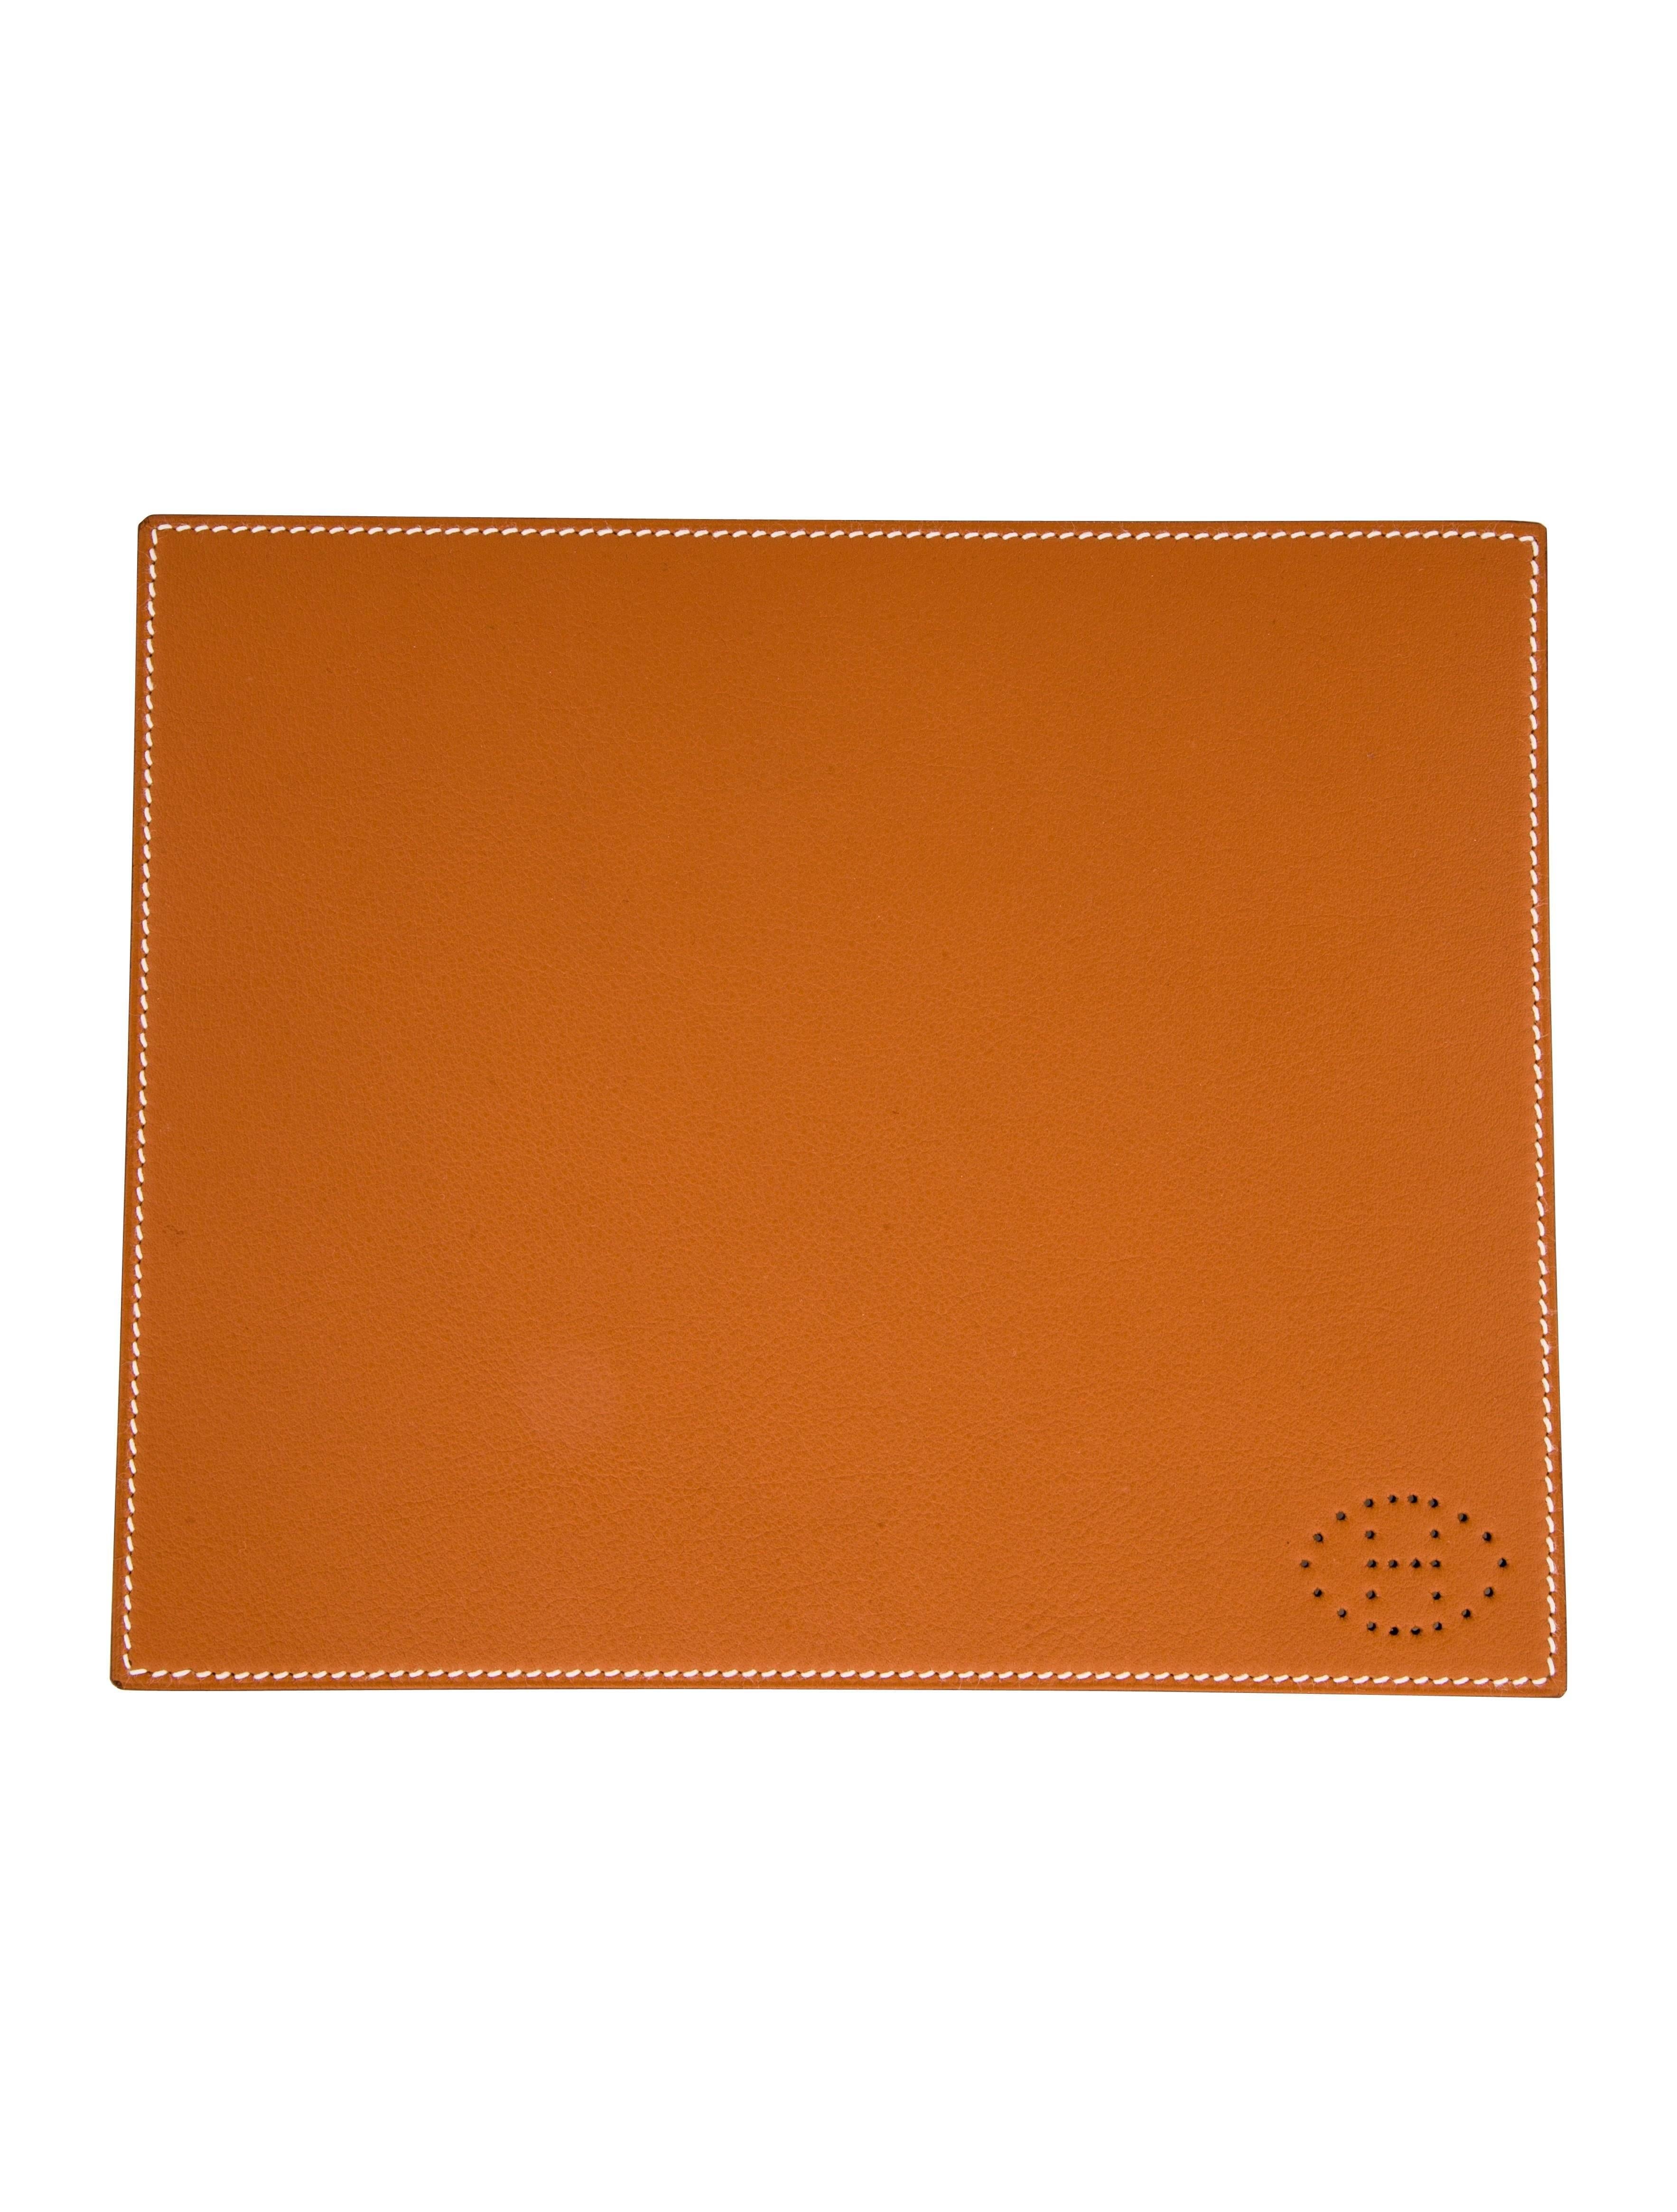 Hermes Cognac Brown Leather Men's Women's Miscellaneous GiftDesk Table Pad in Box 

Leather (Taurillon) 
Signed Hermes underneath
Made in France
Measures 7.25" W x 8.75" L
Includes original Hermes dust bag and box 